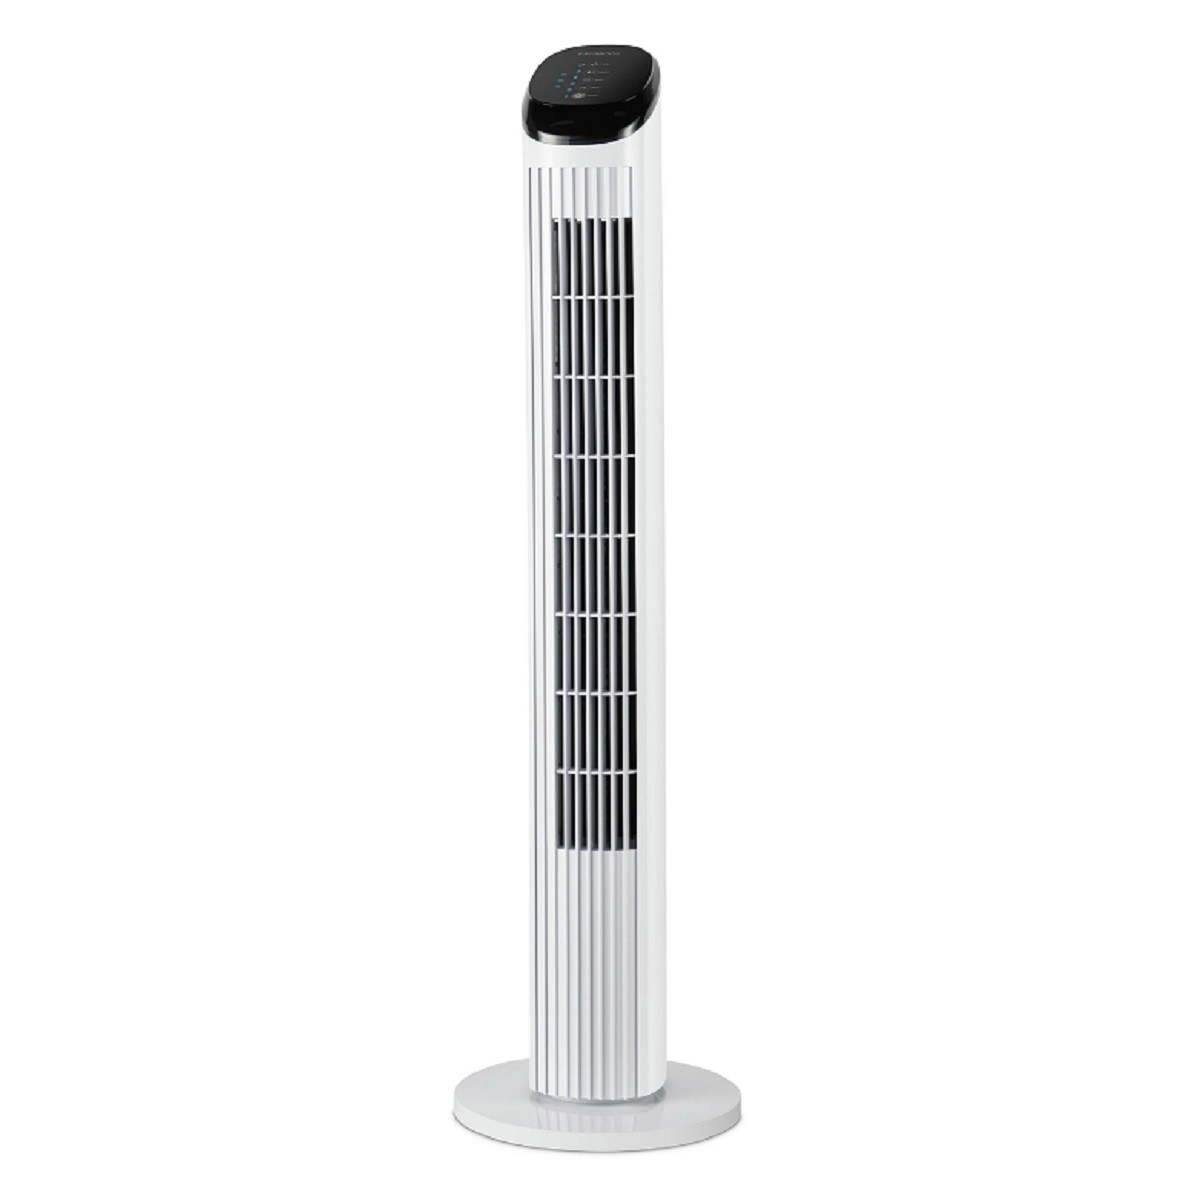 Kambrook 87cm Tower Fan Touch Display White Ktf840wht with regard to proportions 1200 X 1200